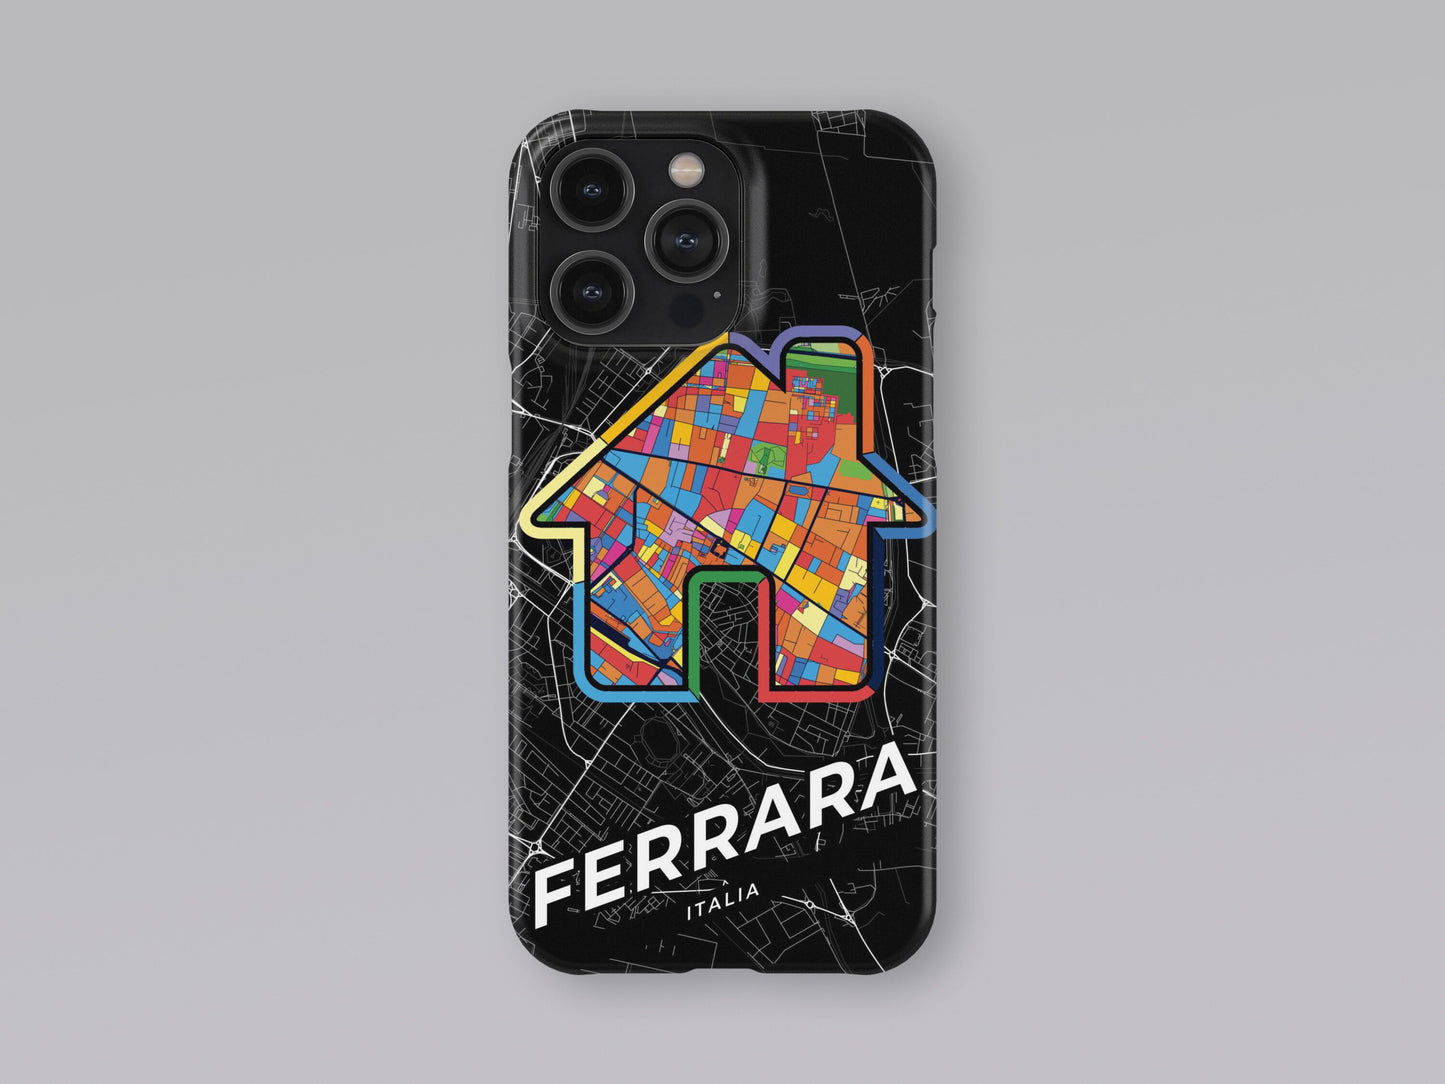 Ferrara Italy slim phone case with colorful icon. Birthday, wedding or housewarming gift. Couple match cases. 3